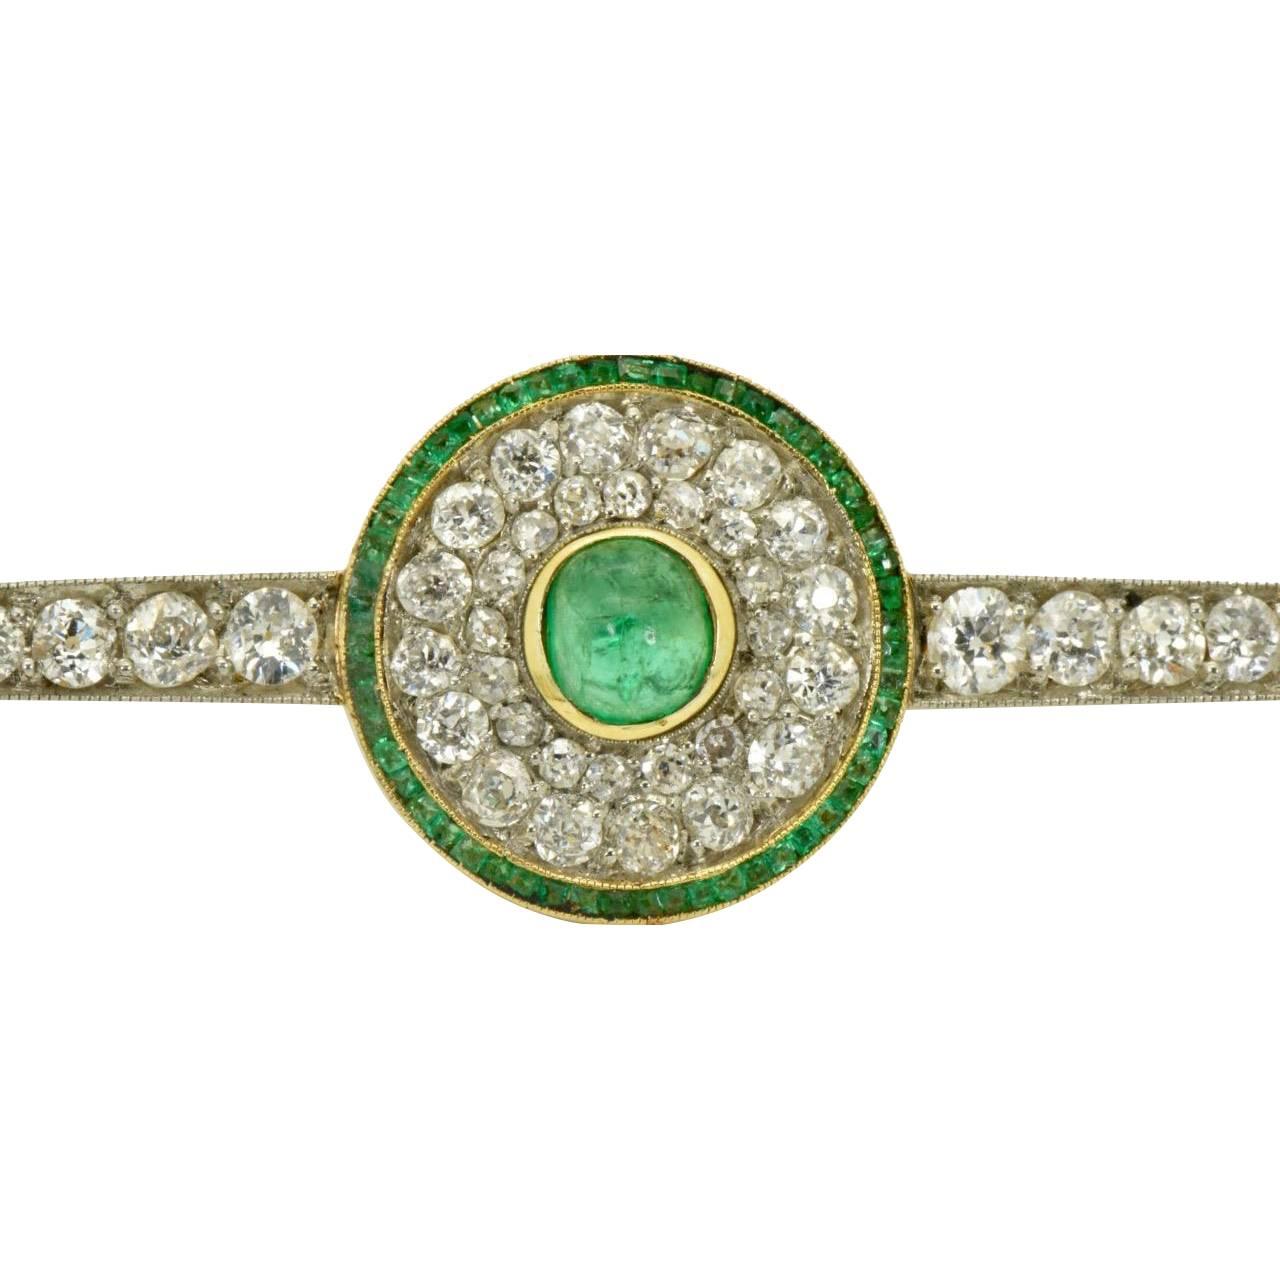 Antique Cartier 5 Carat Diamond and Colombian Emerald Brooch For Sale